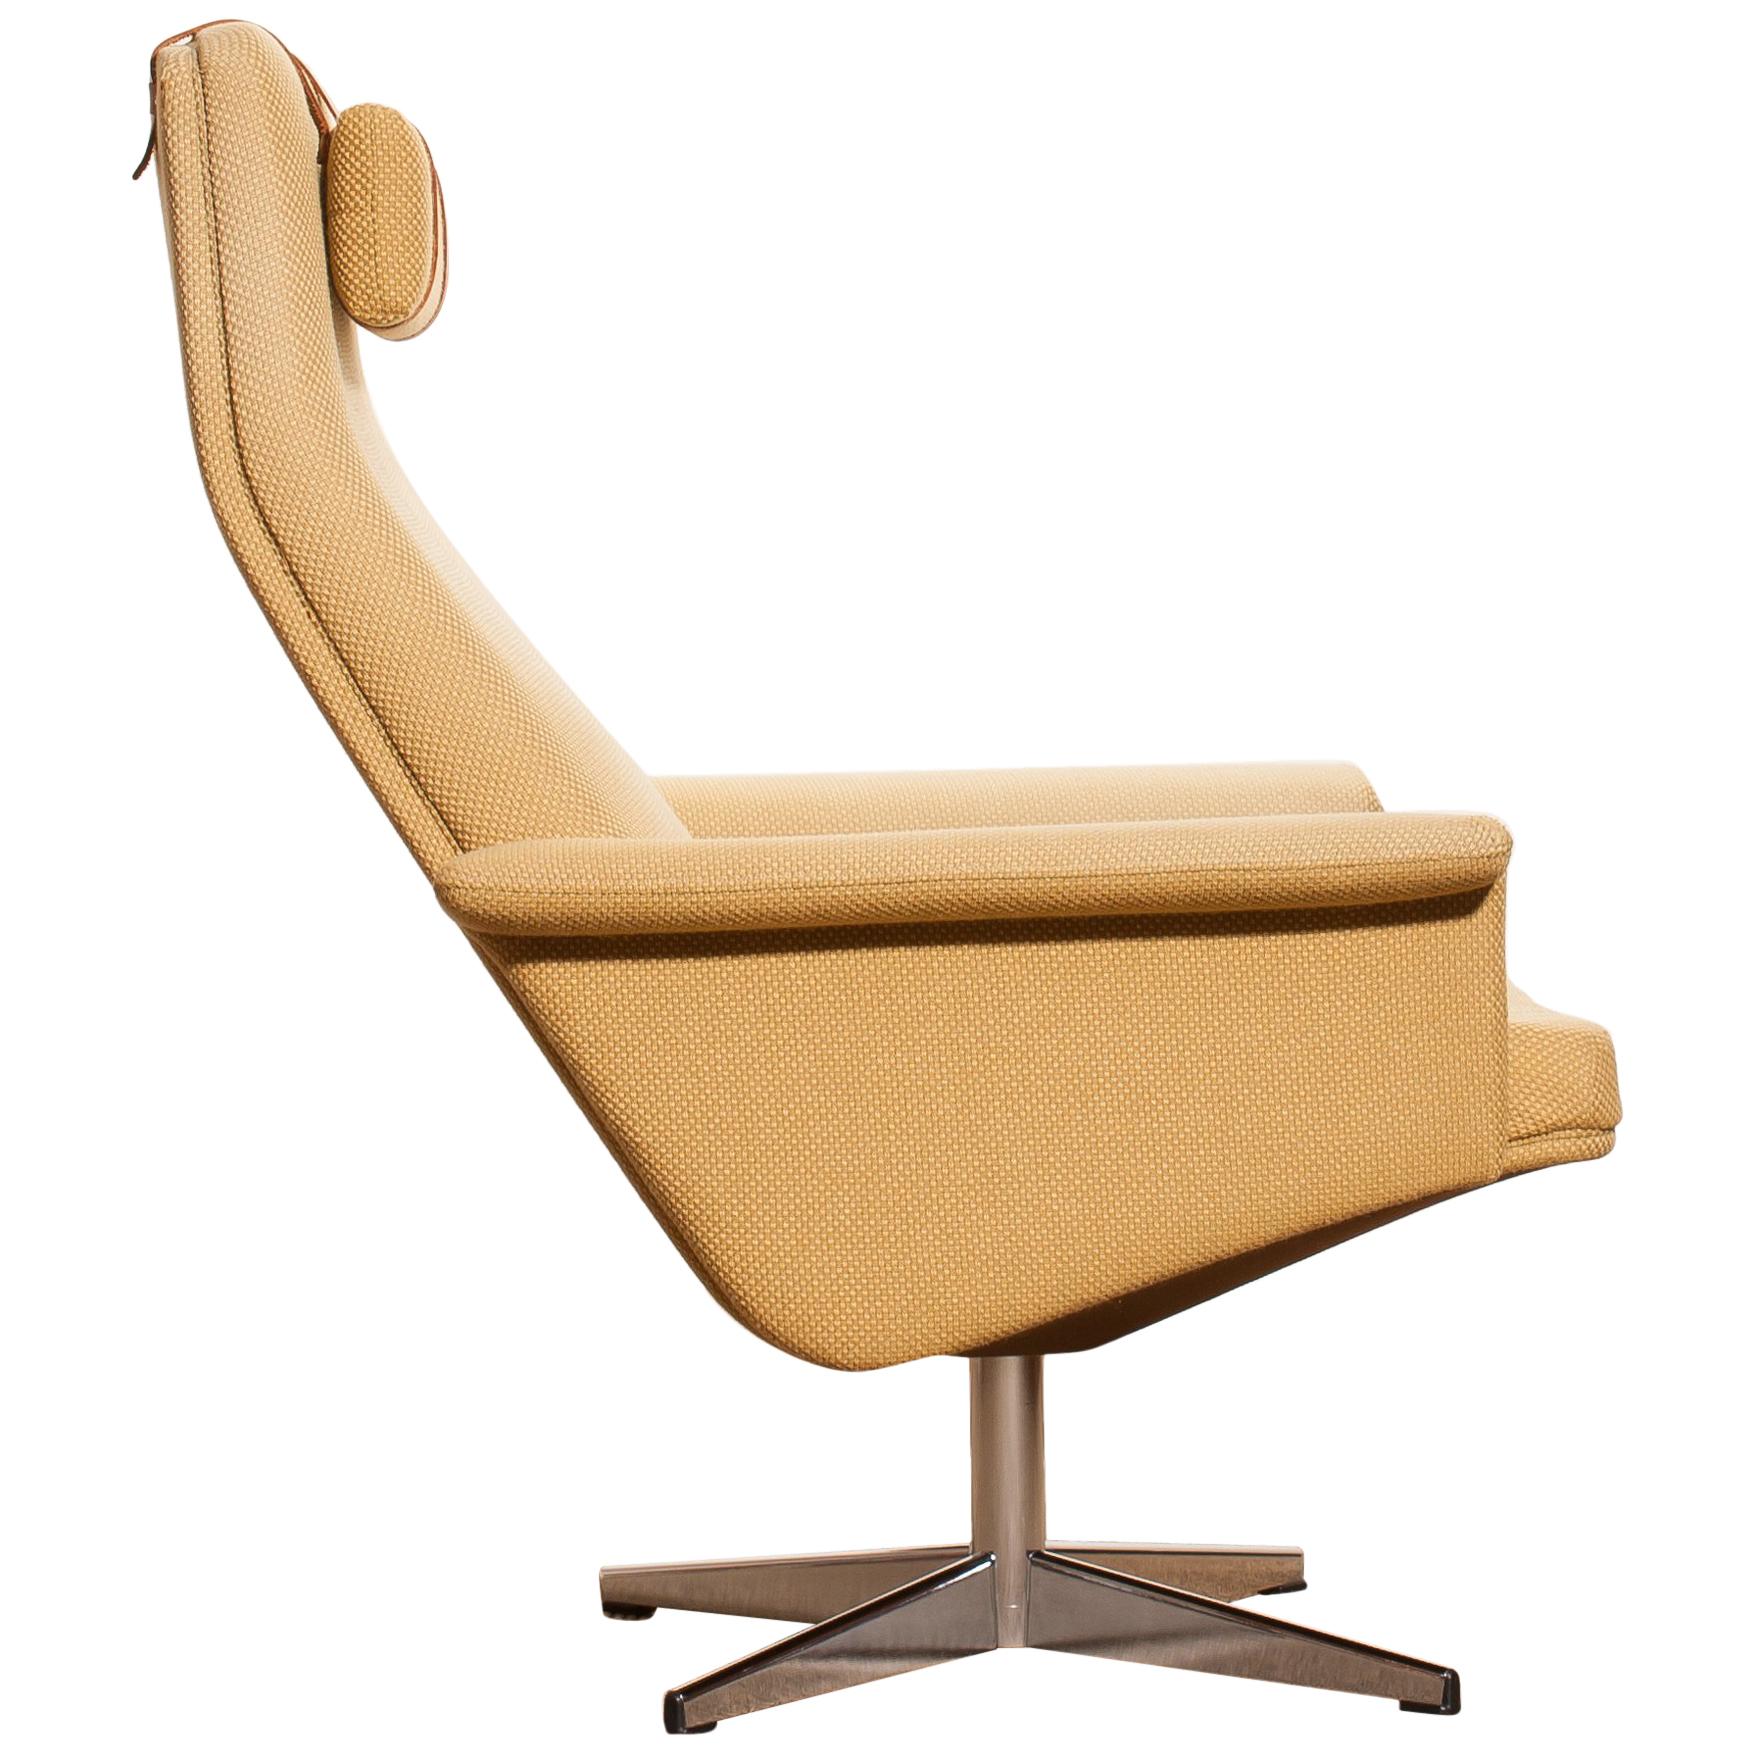 1960s, Light Yellow Fabric Swivel Lounge Chair by DUX Sweden